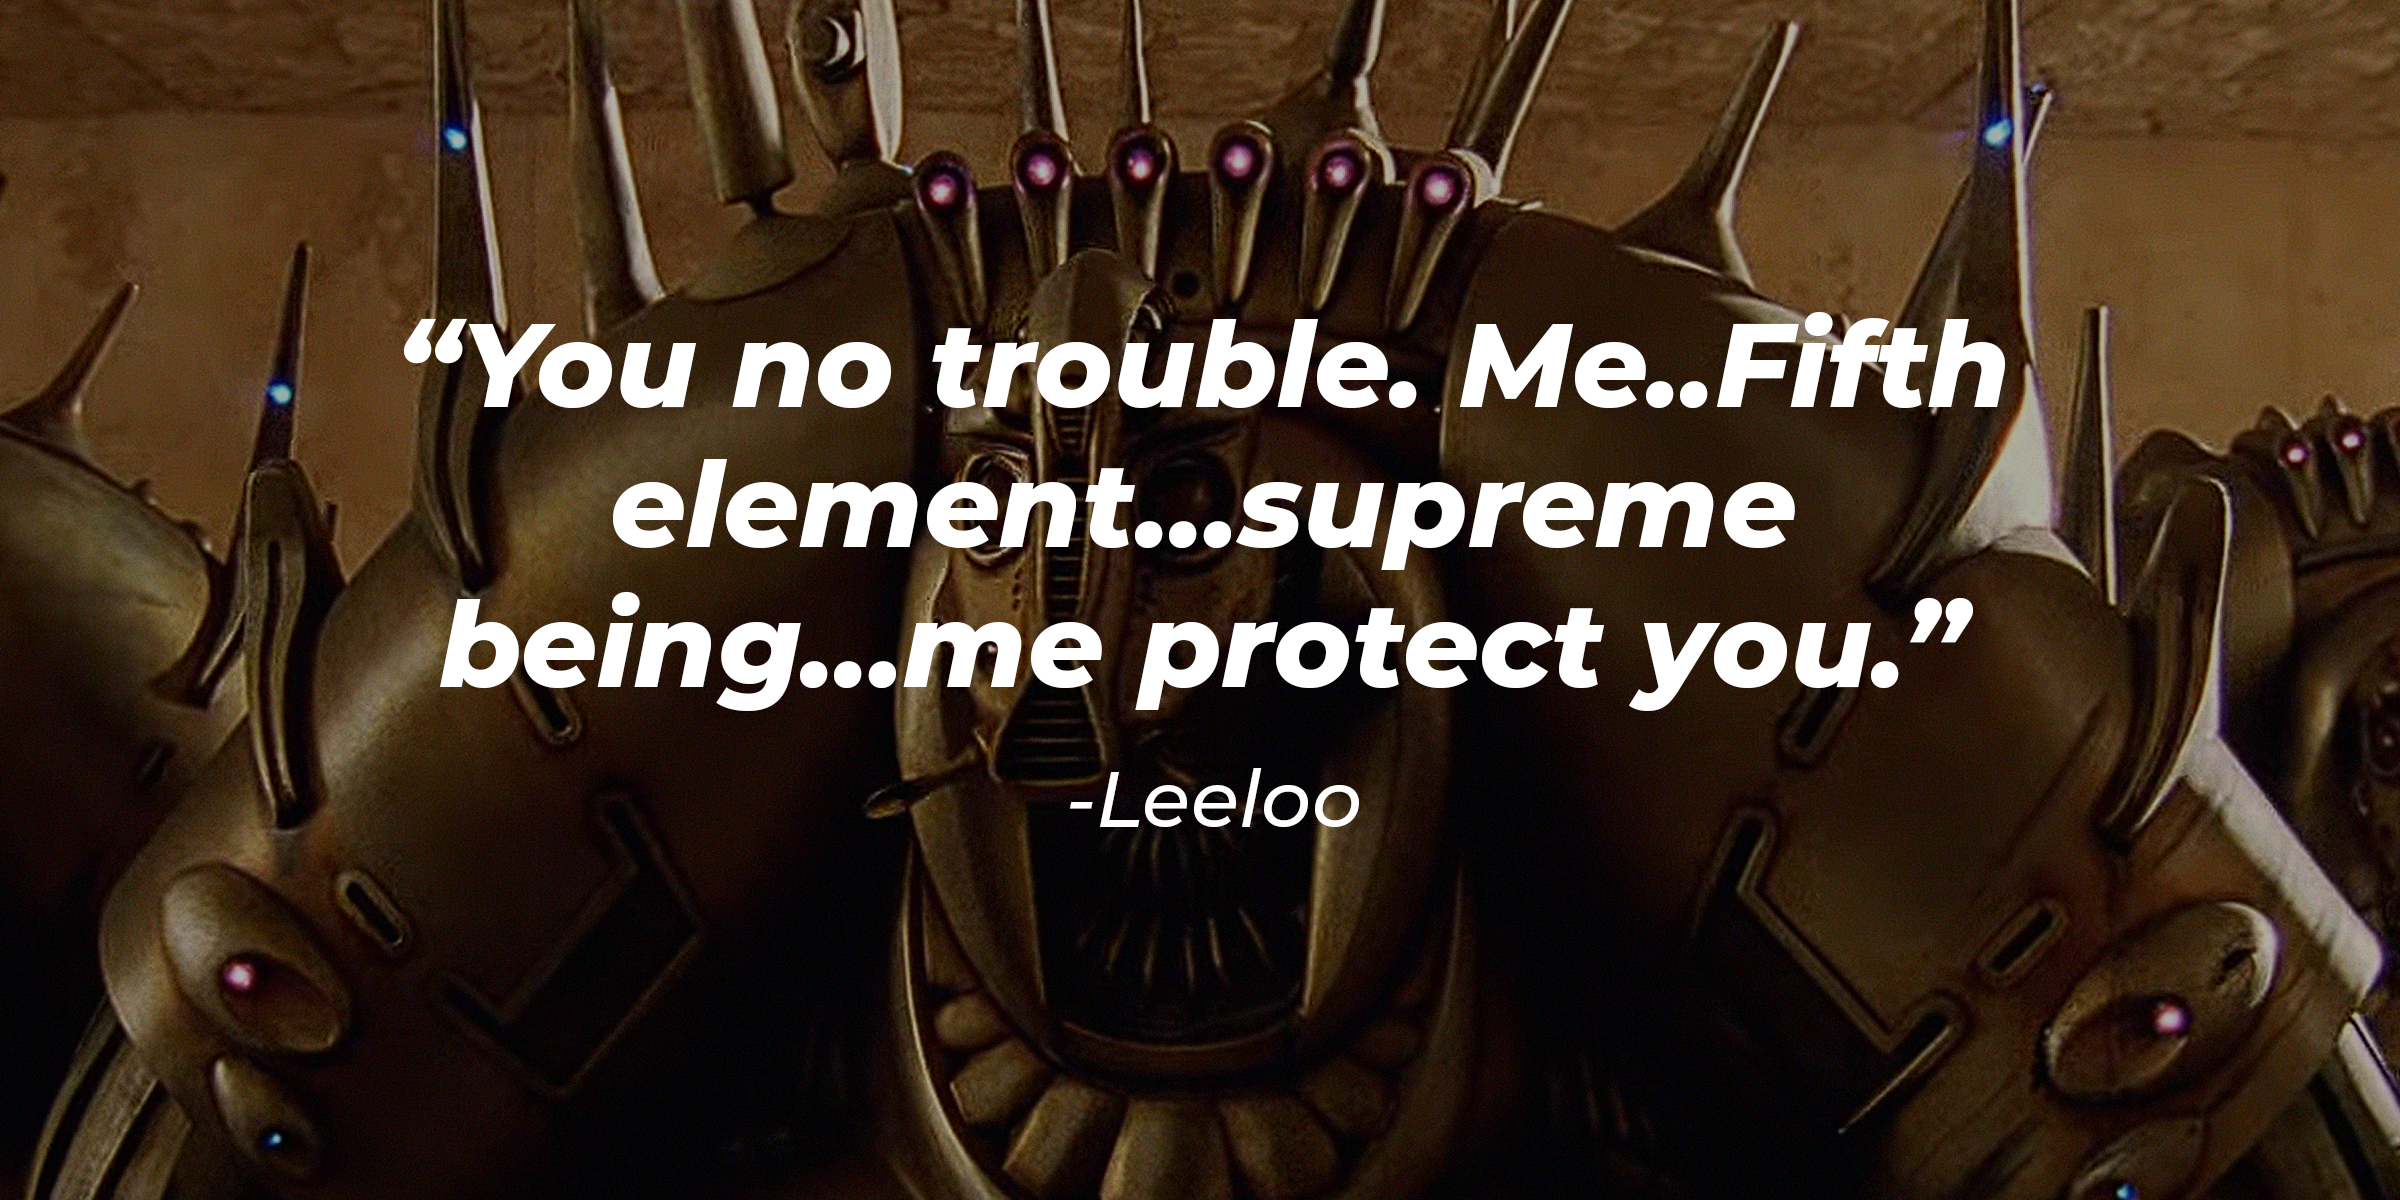 Leeloo's quote: "You no trouble. Me..Fifth element...supreme being...me protect you" | Source: youtube.com/sonypictures